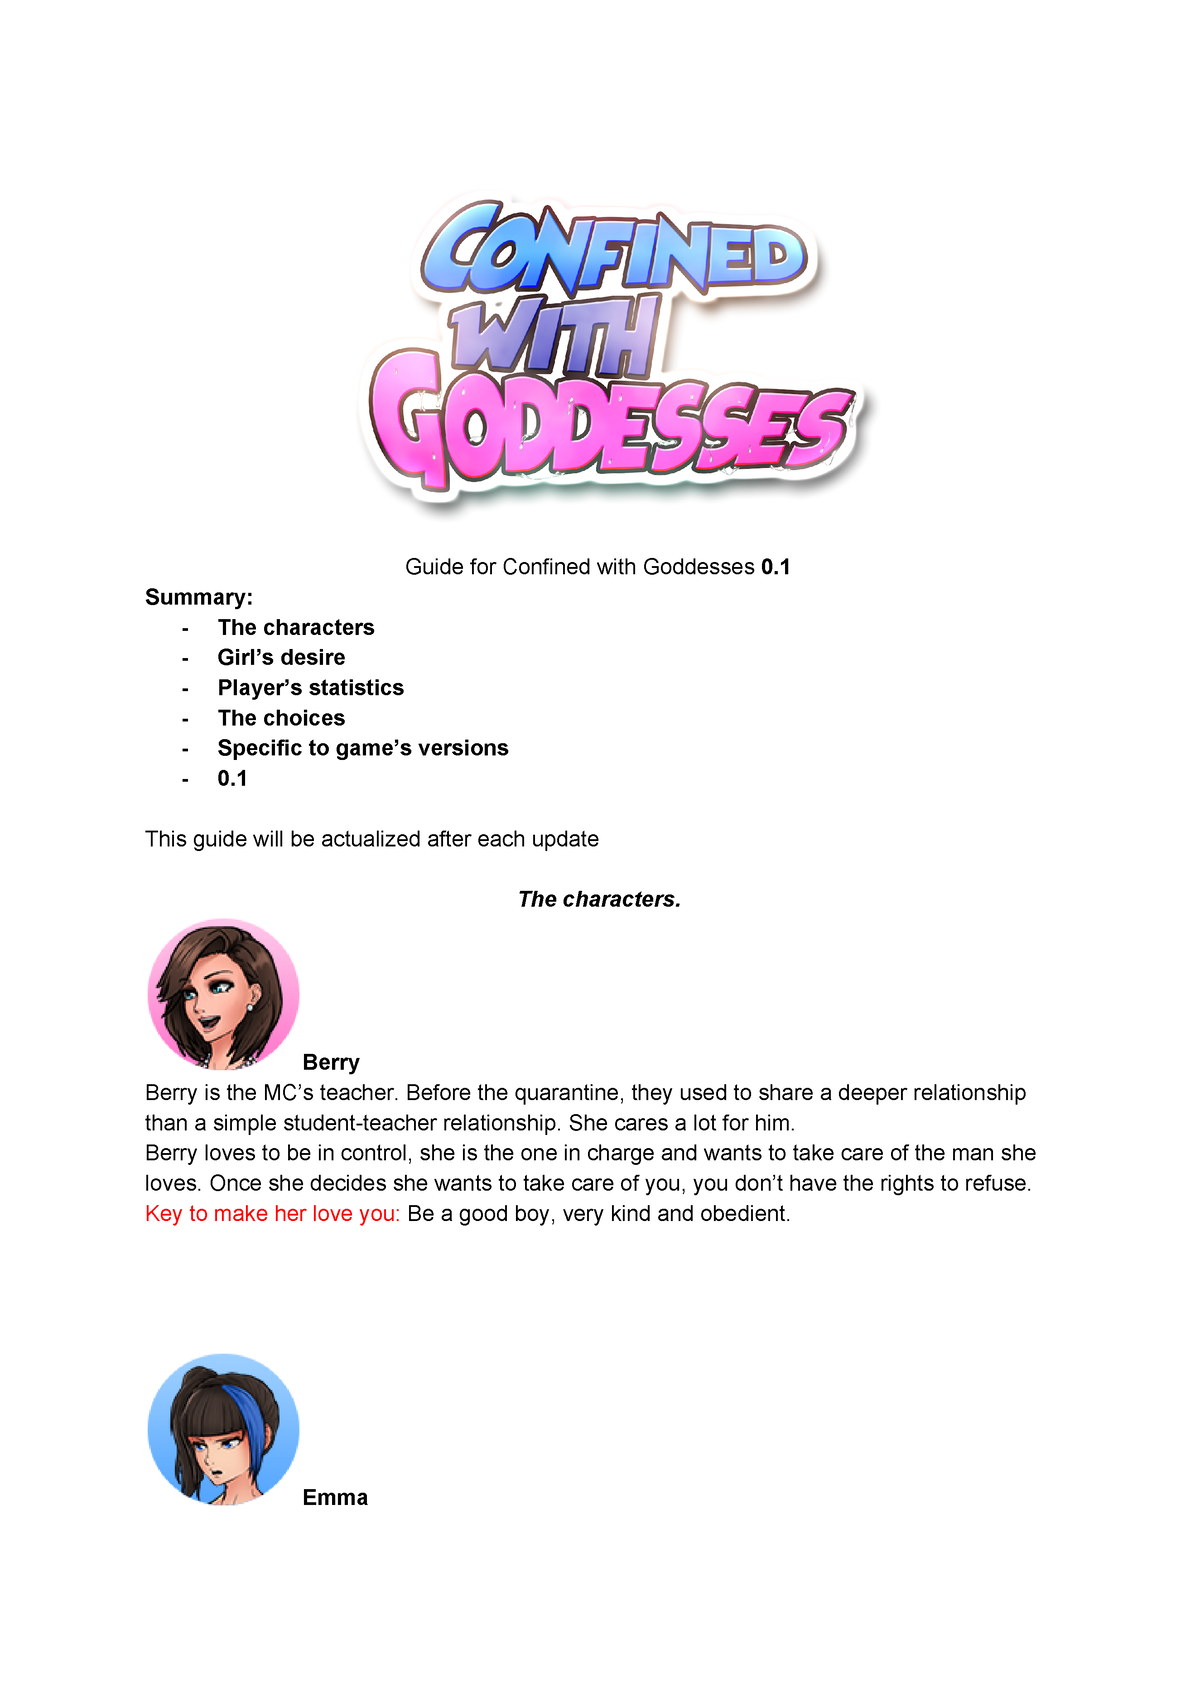 Cw G guide - N7jmum - Guide for Confined with Goddesses 0. Summary: The  characters Girl's desire - Studocu